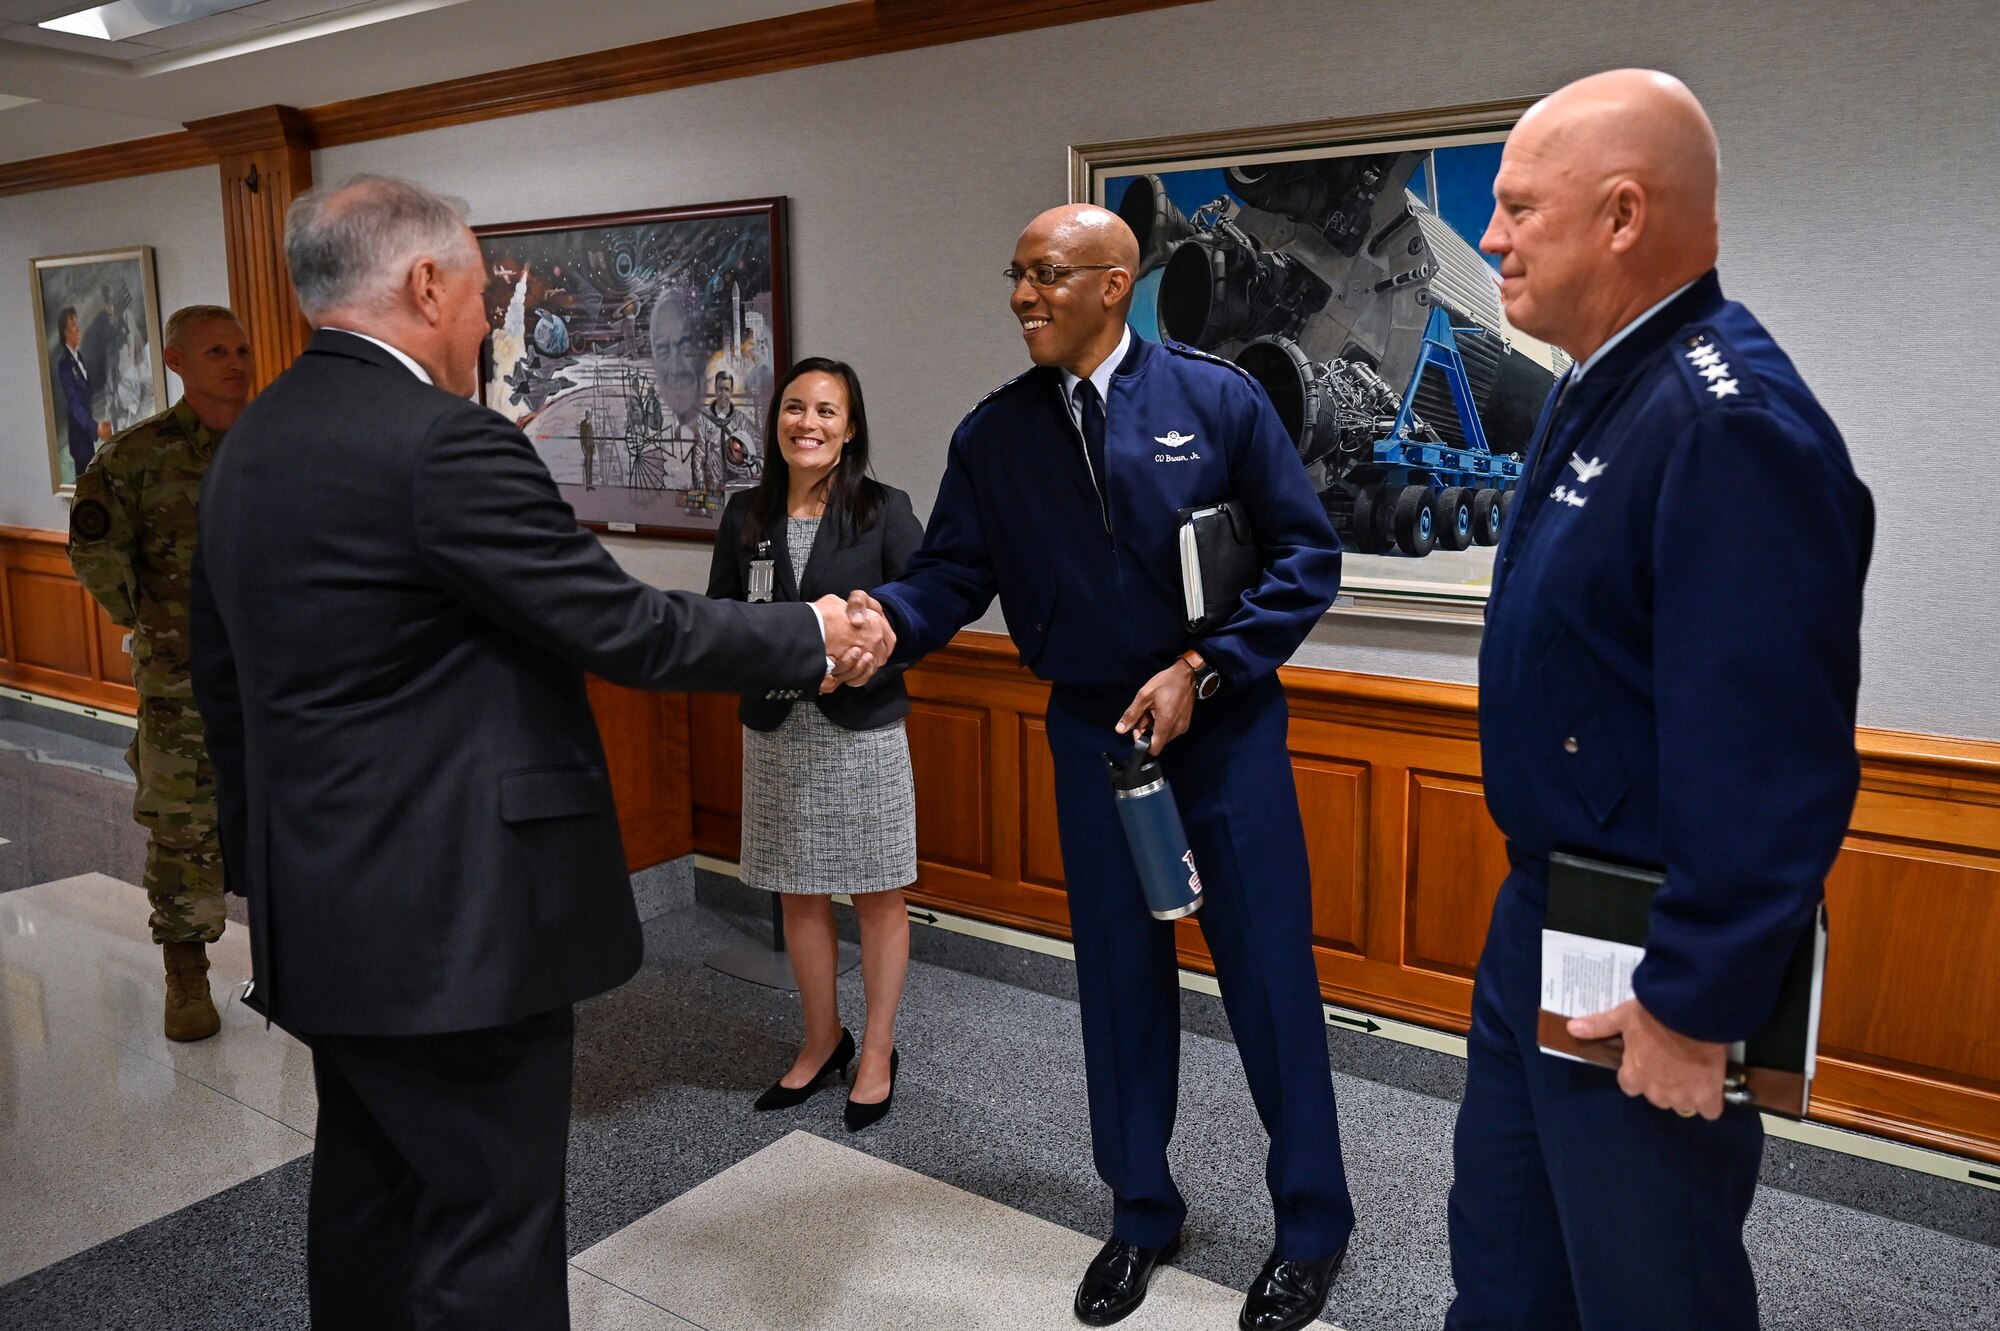 Secretary of the Air Force Frank Kendall shakes hands with Air Force Chief of Staff Gen. CQ Brown, Jr., before a meeting with Under Secretary of the Air Force Gina Ortiz Jones, Brown, and Chief of Space Operations Gen. John W. “Jay” Raymond at the Pentagon, Arlington, Va., July 28, 2021. (U.S. Air Force photo by Eric Dietrich)